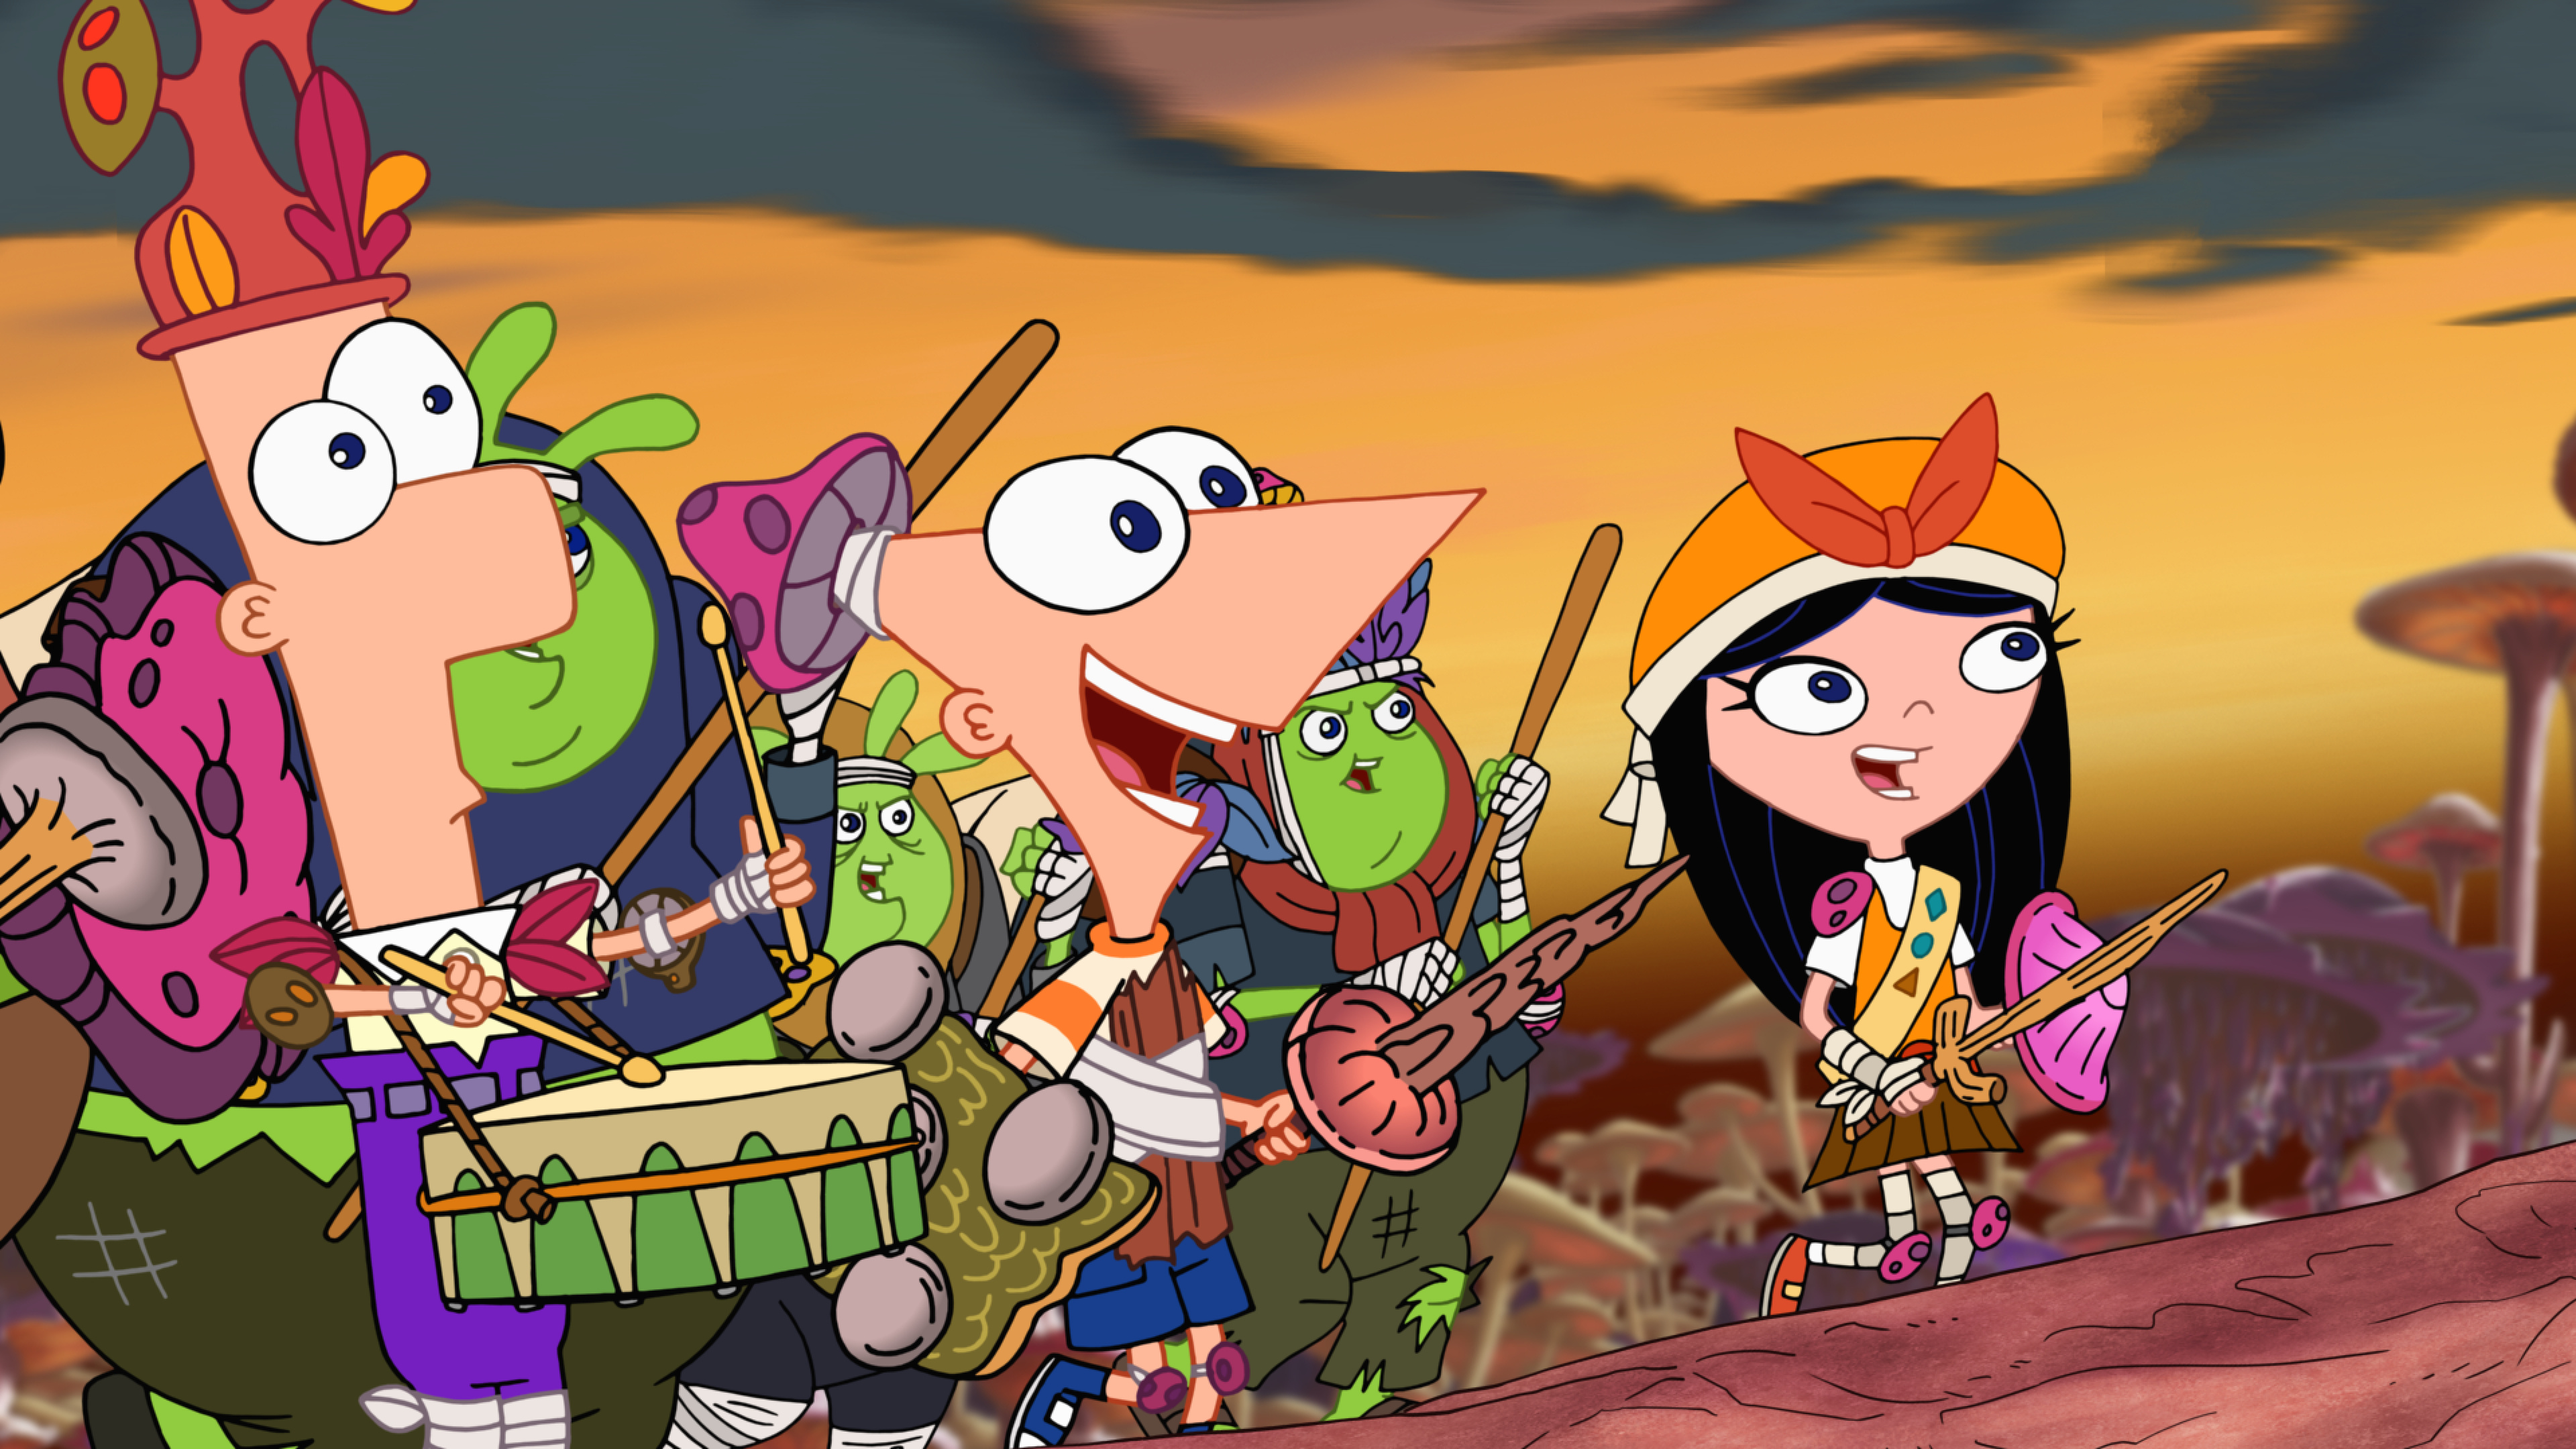 Phineas and Ferb, Challenges of making a film, COVID-19 pandemic, 3840x2160 4K Desktop